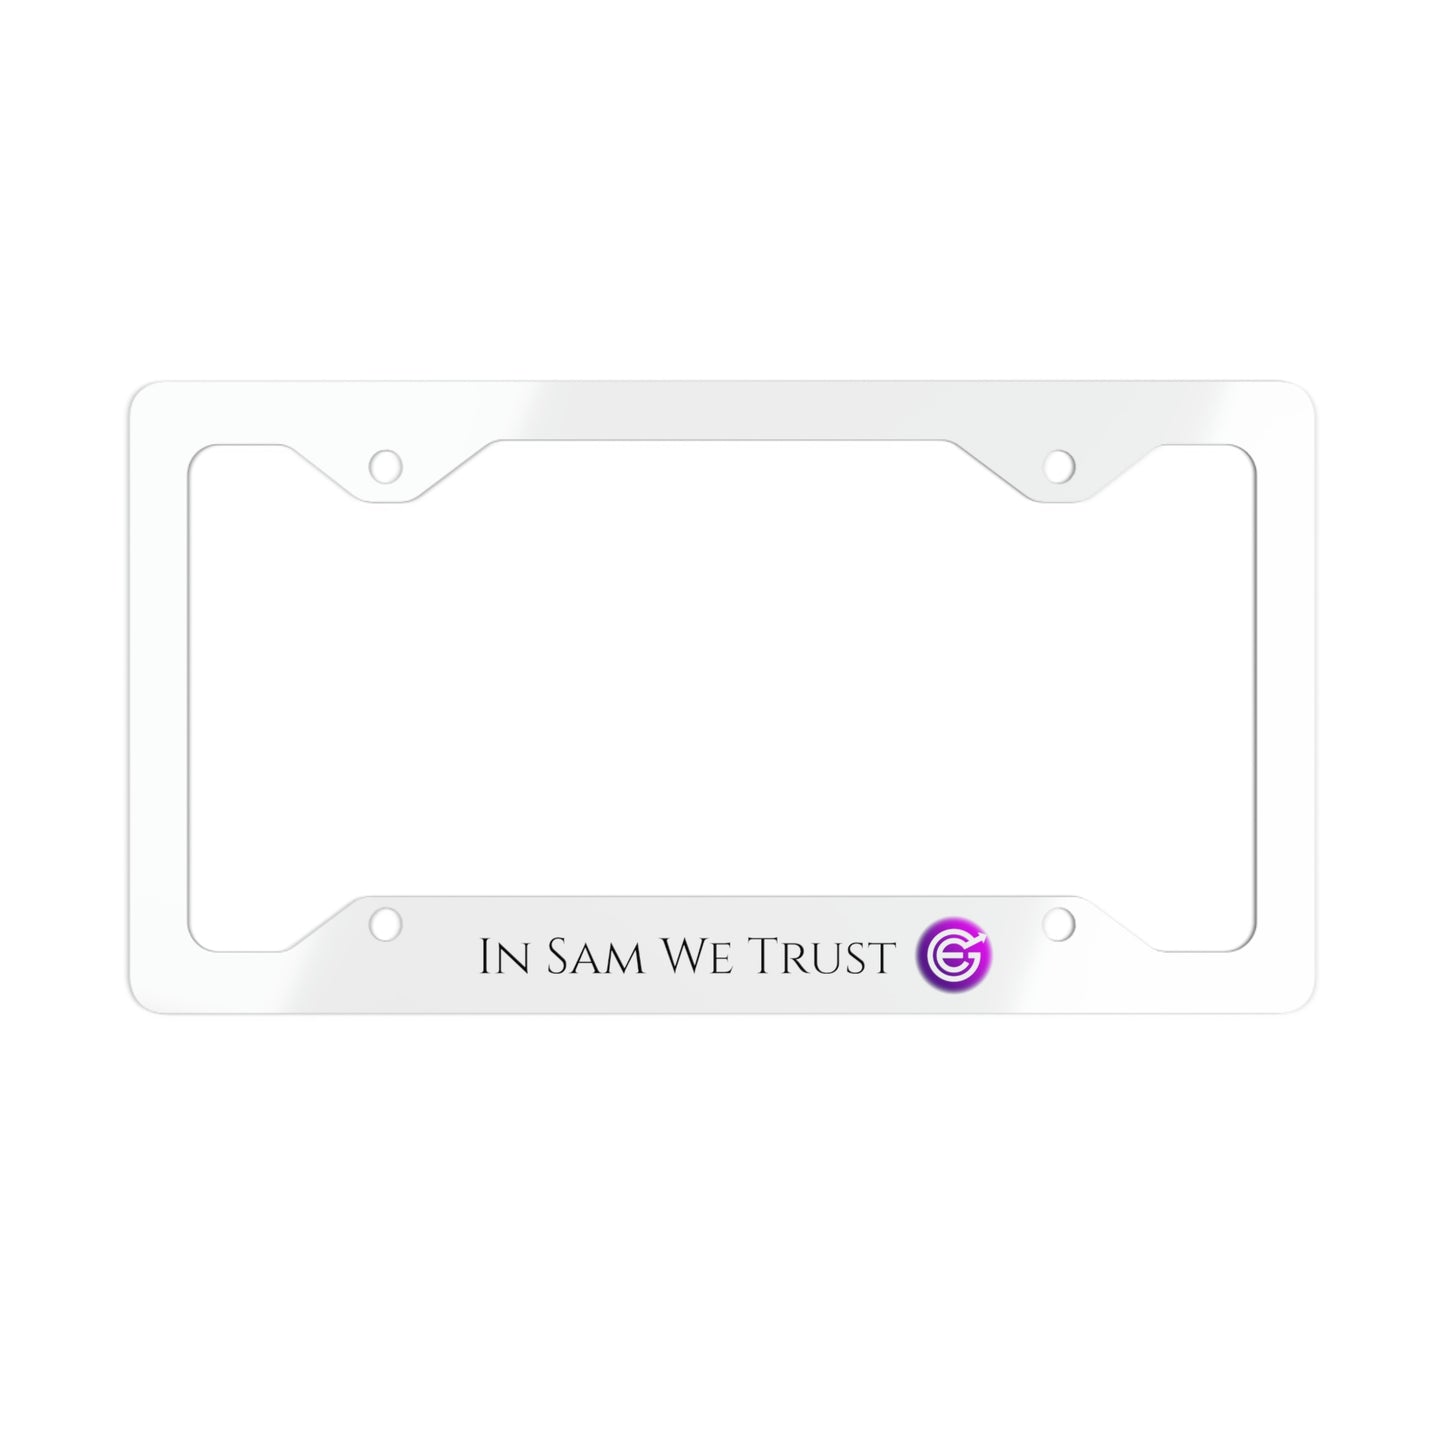 USA - Metal License Plate Frame - In Sam We Trust with EverGrow logo -